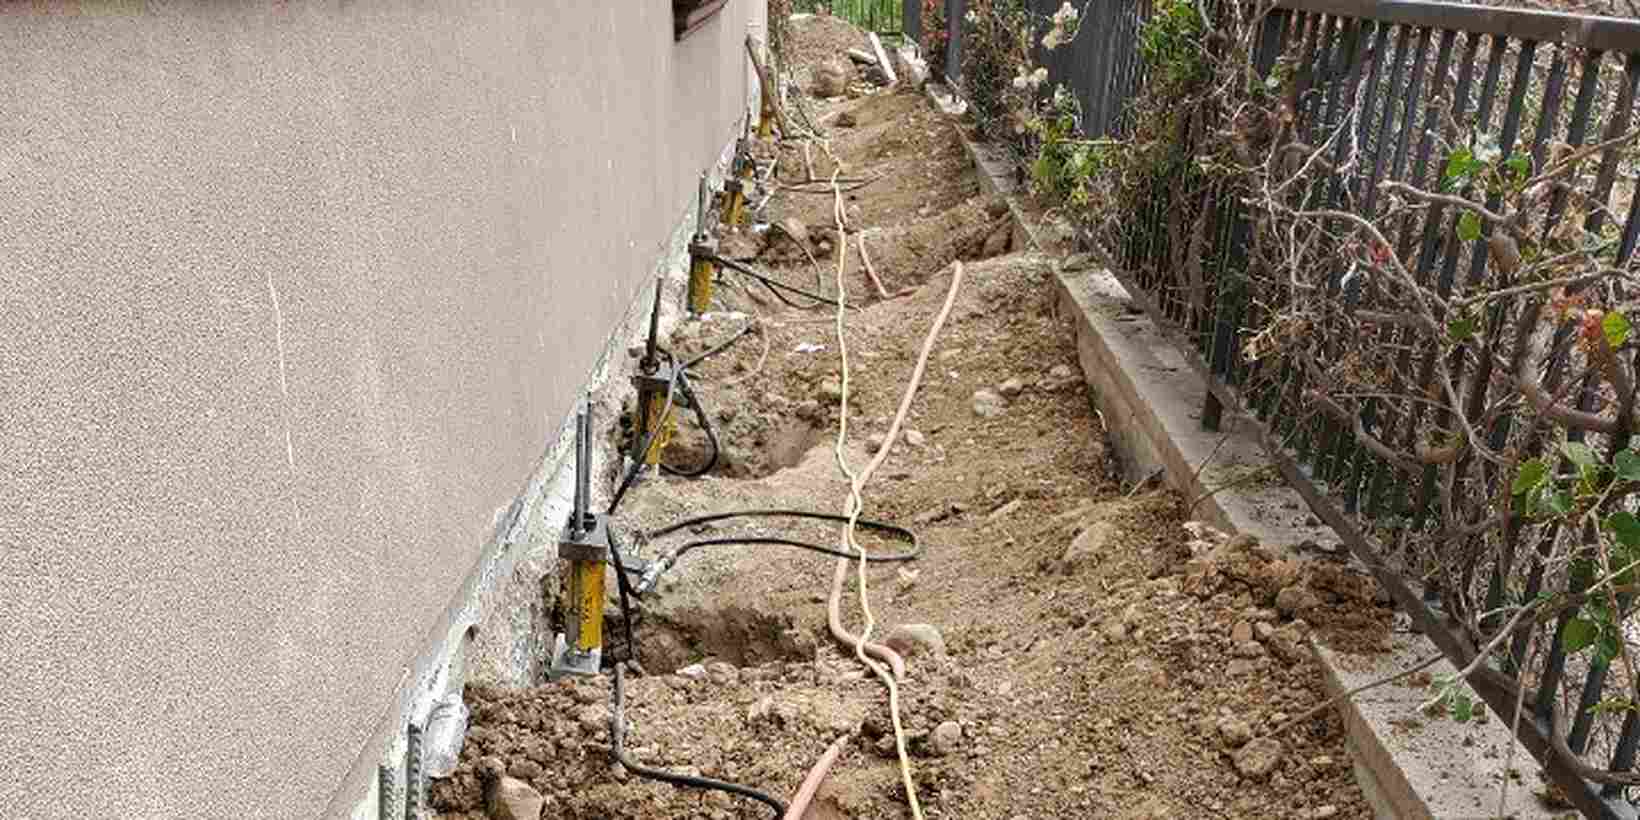 What to Expect on the Last Day of Your Foundation Repair Project